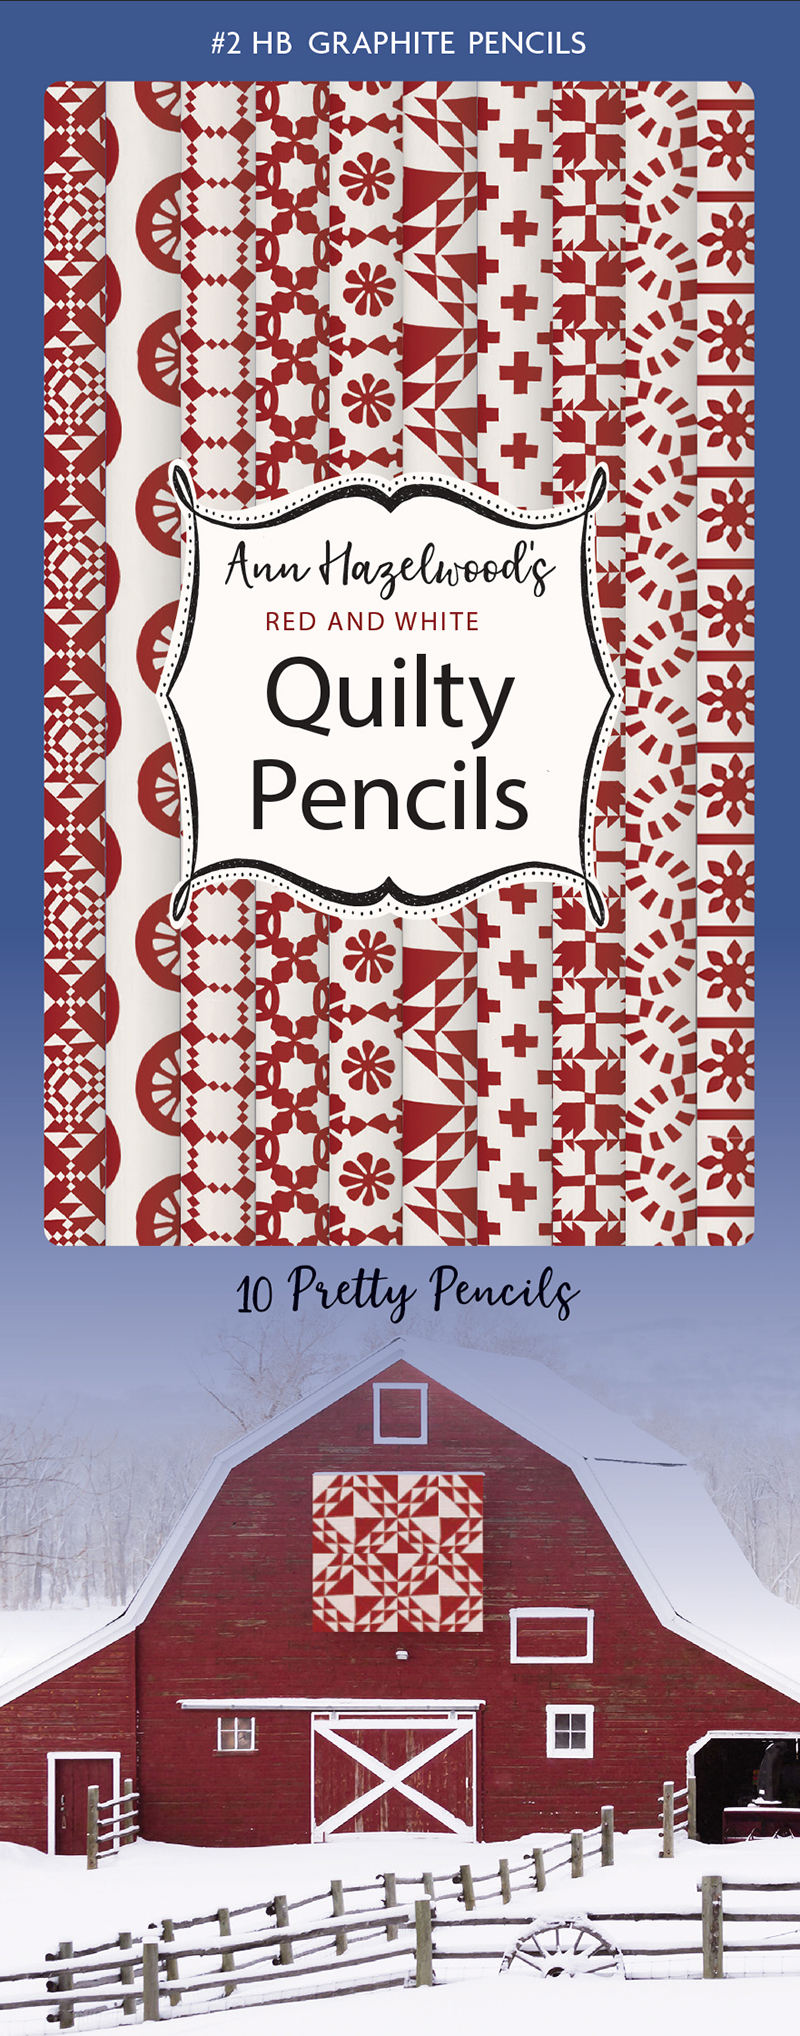 Ann Hazelwood’s Red & White Quilty Pencils